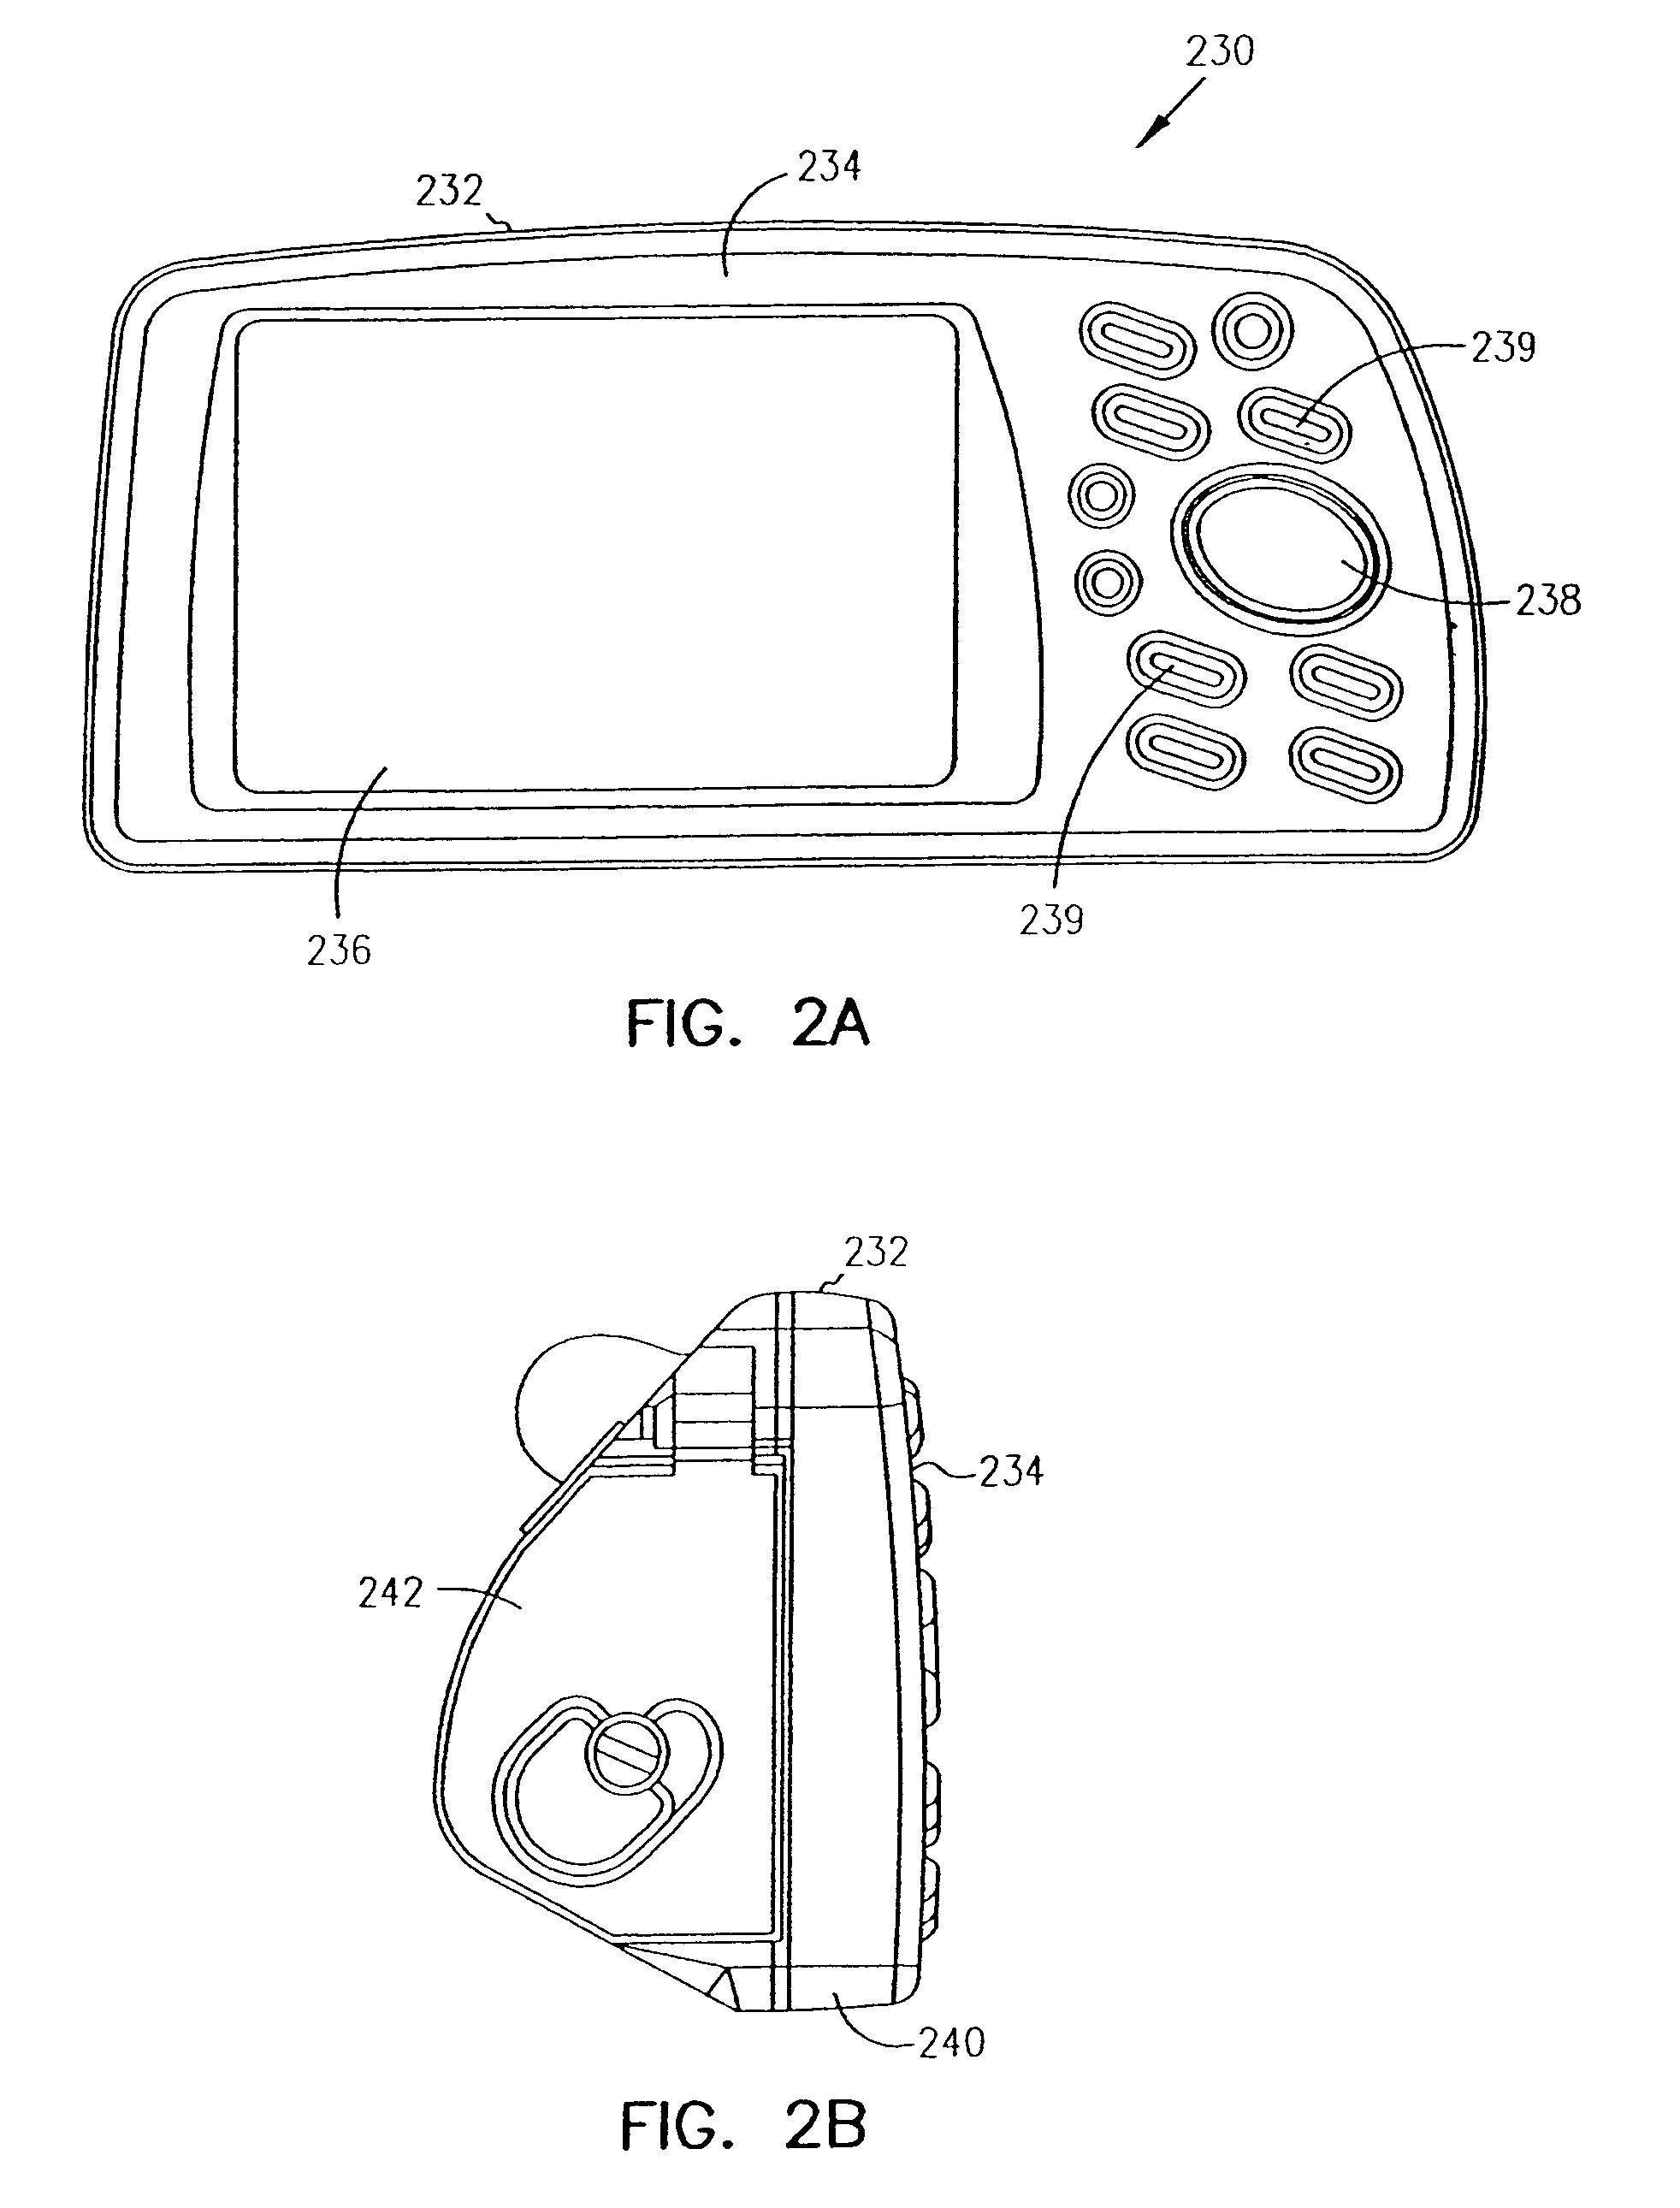 Systems, functional data, and methods for generating a route